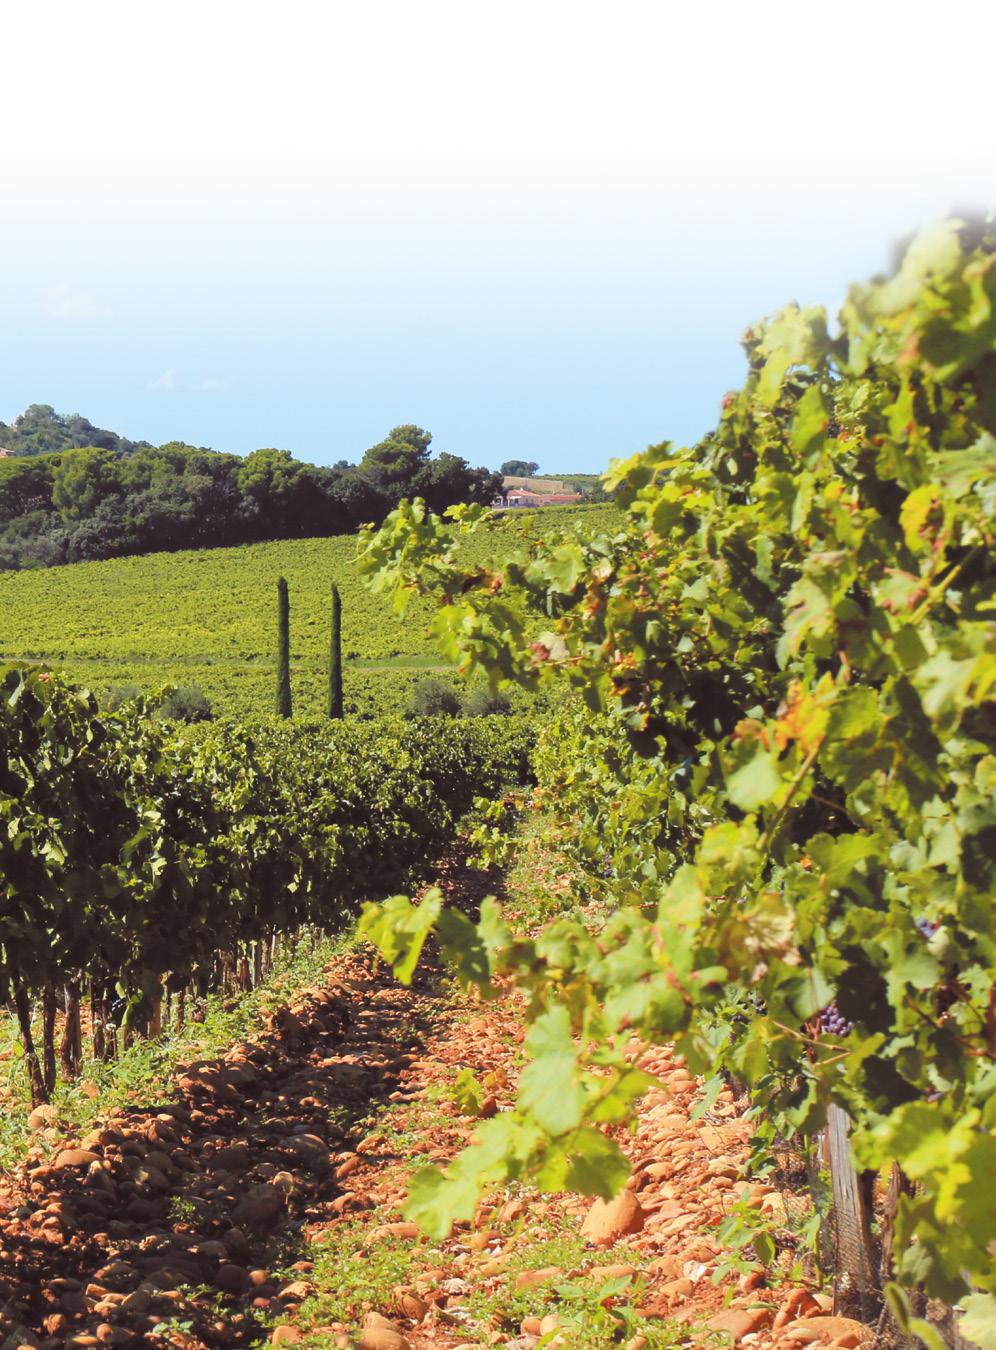 @domainepierreusseglio DOMAINE PIERRE USSEGLIO This well-regarded estate is run by brothers Thierry and Jean-Pierre Usseglio, who divide their time respectively between the cellar and the vineyard.